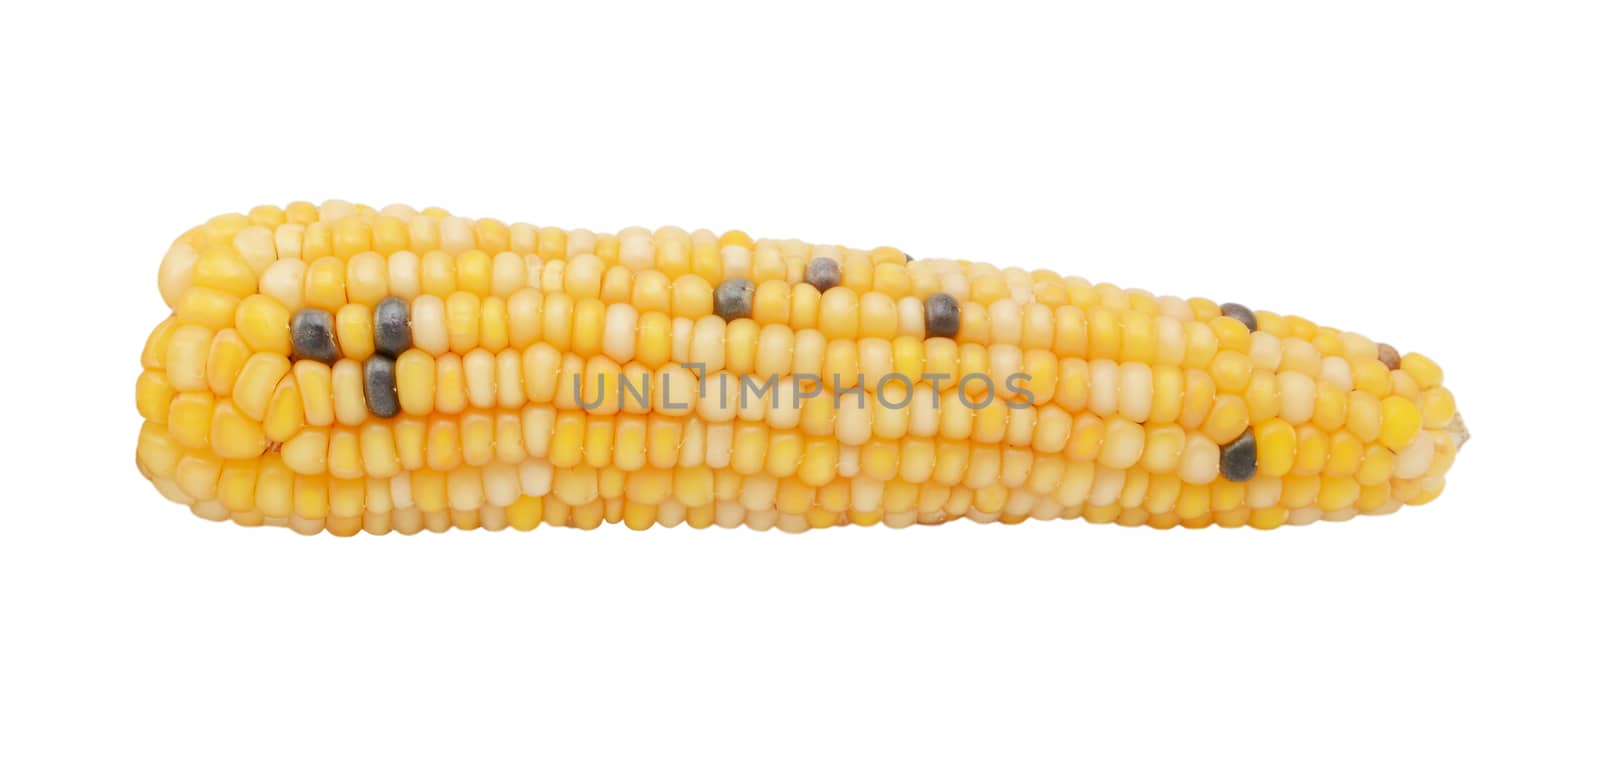 Ornamental Fiesta sweetcorn cob dotted with hard white and black niblets, isolated on a white background